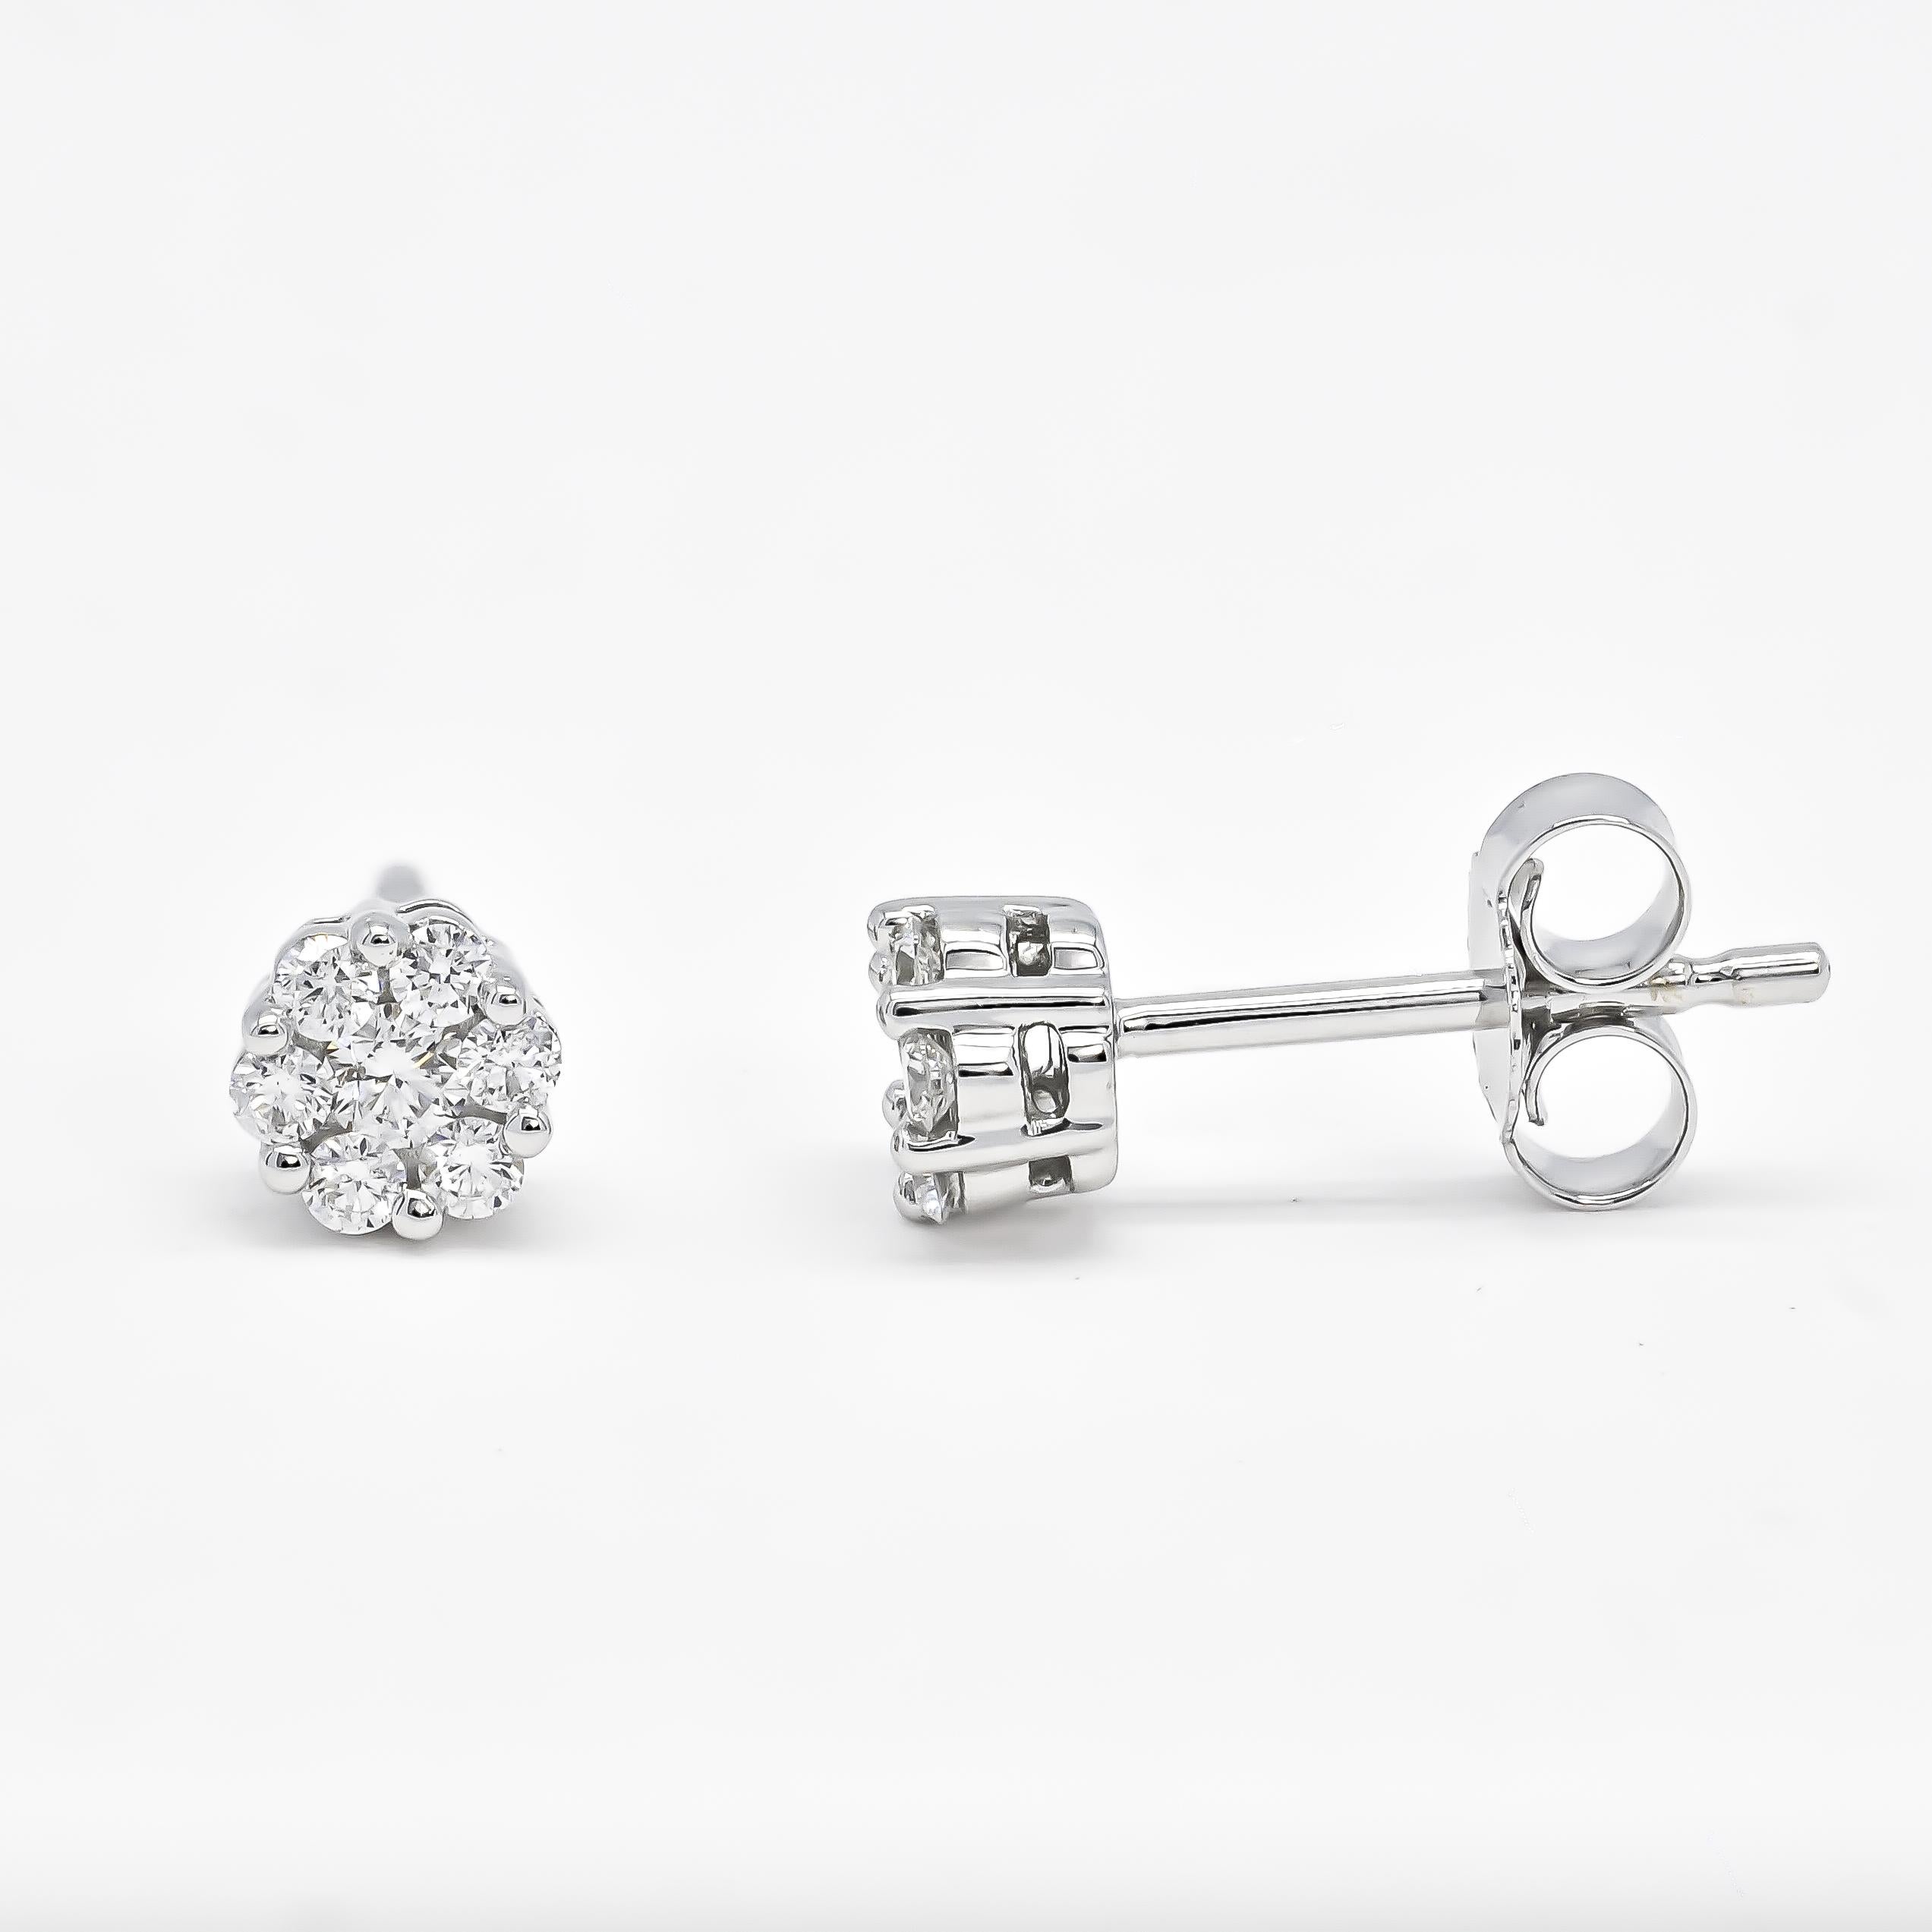 Introducing our exquisite Natural Diamond 0.52 carat 18 Karat White Gold Classic Stud Earrings – the epitome of timeless elegance and understated luxury. Crafted to perfection, these earrings are more than just jewelry; they are a symbol of enduring